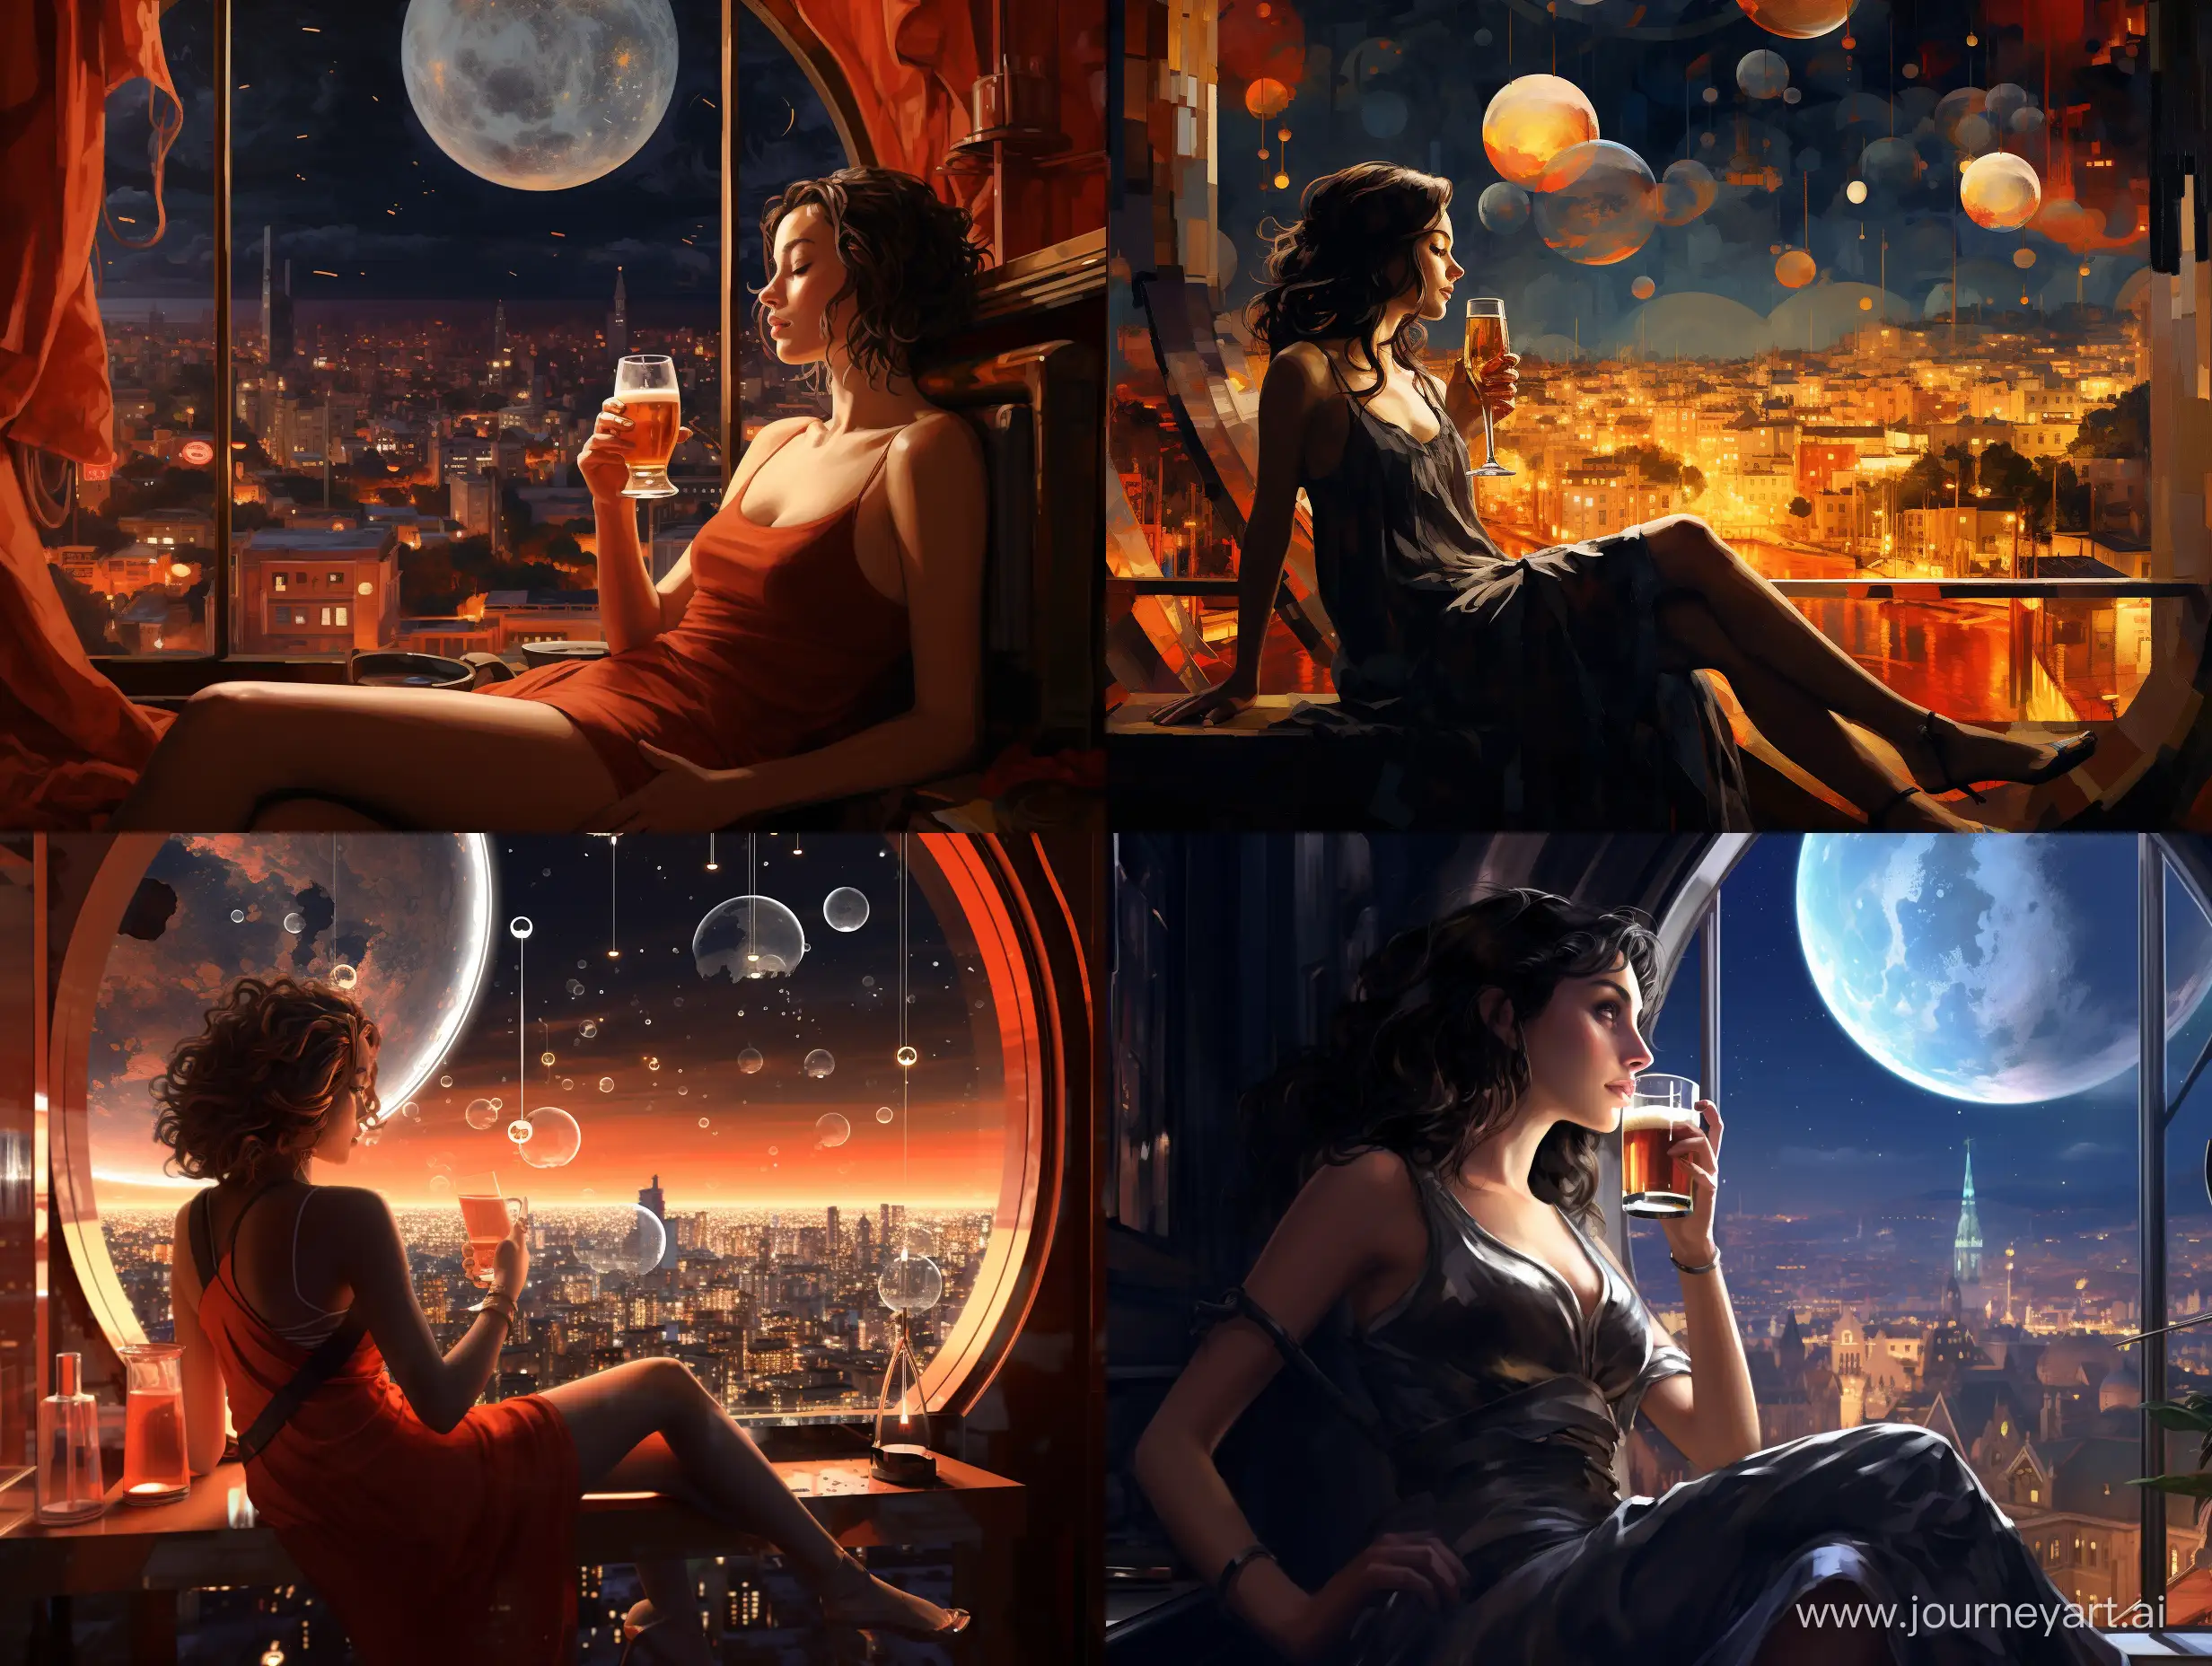 Futuristic-Night-Scene-Girl-Crafting-Amidst-Planets-in-the-City